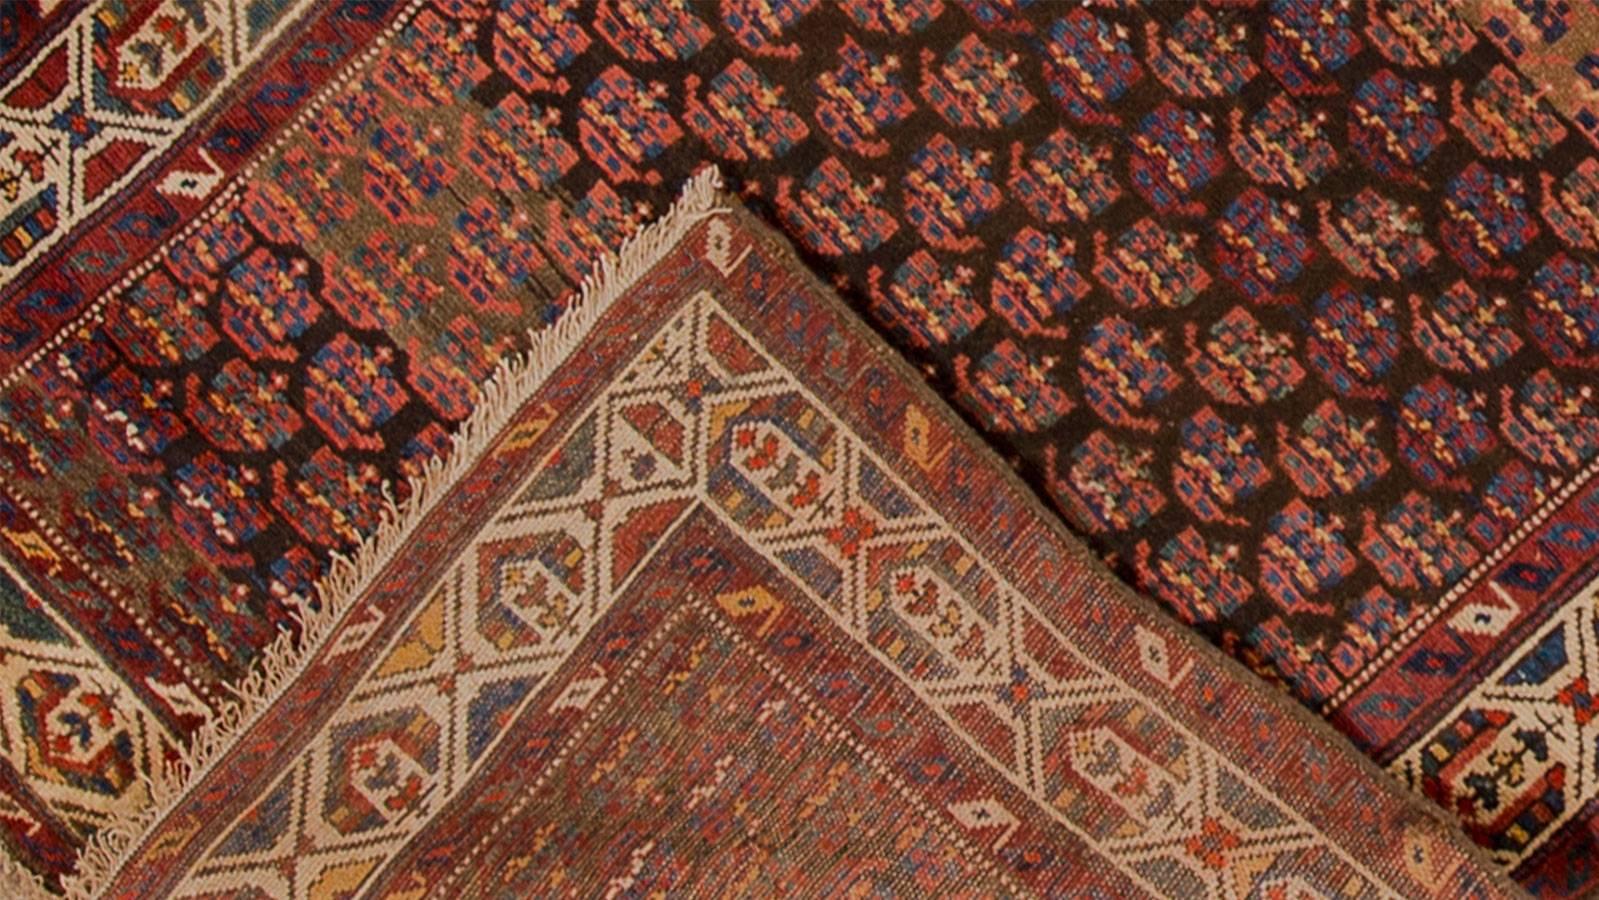 1905 antique Persian Kurd runner with a thin ivory/cream border, rust field and all-over geometric design. Measures 4x10.